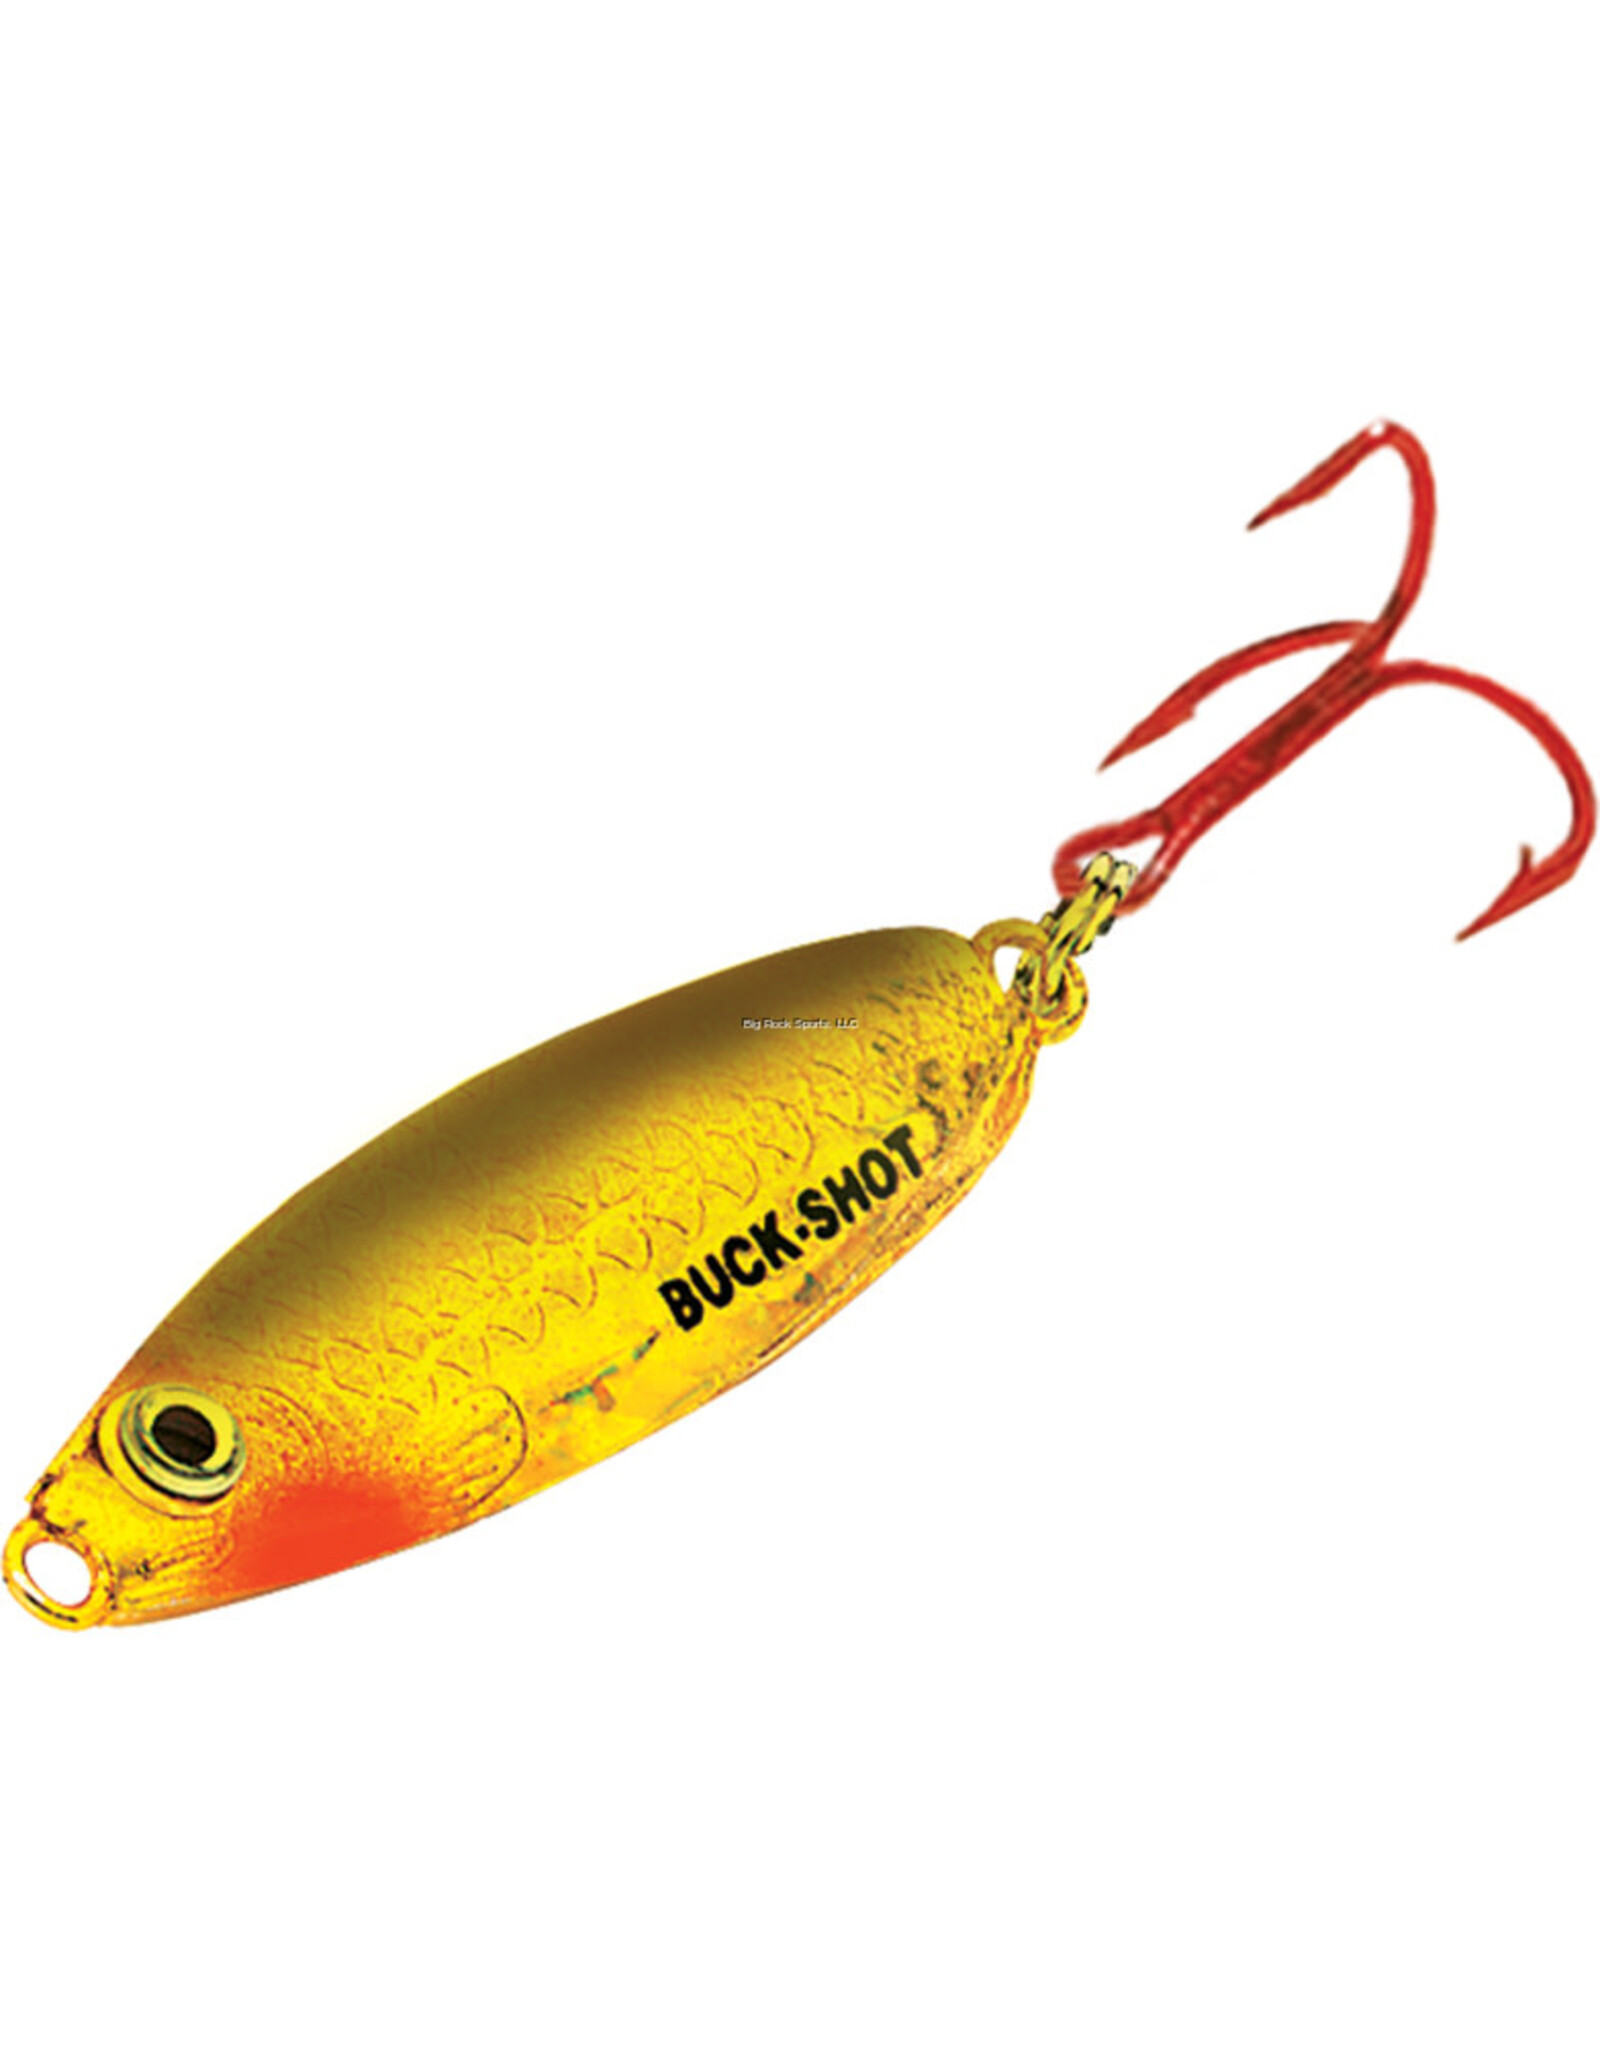 Northland Fishing Tackle Northland BRS7-12 Buck-Shot Rattle Spoon 3/4 Oz, 1/Cd Gold Shiner (5865469-12)